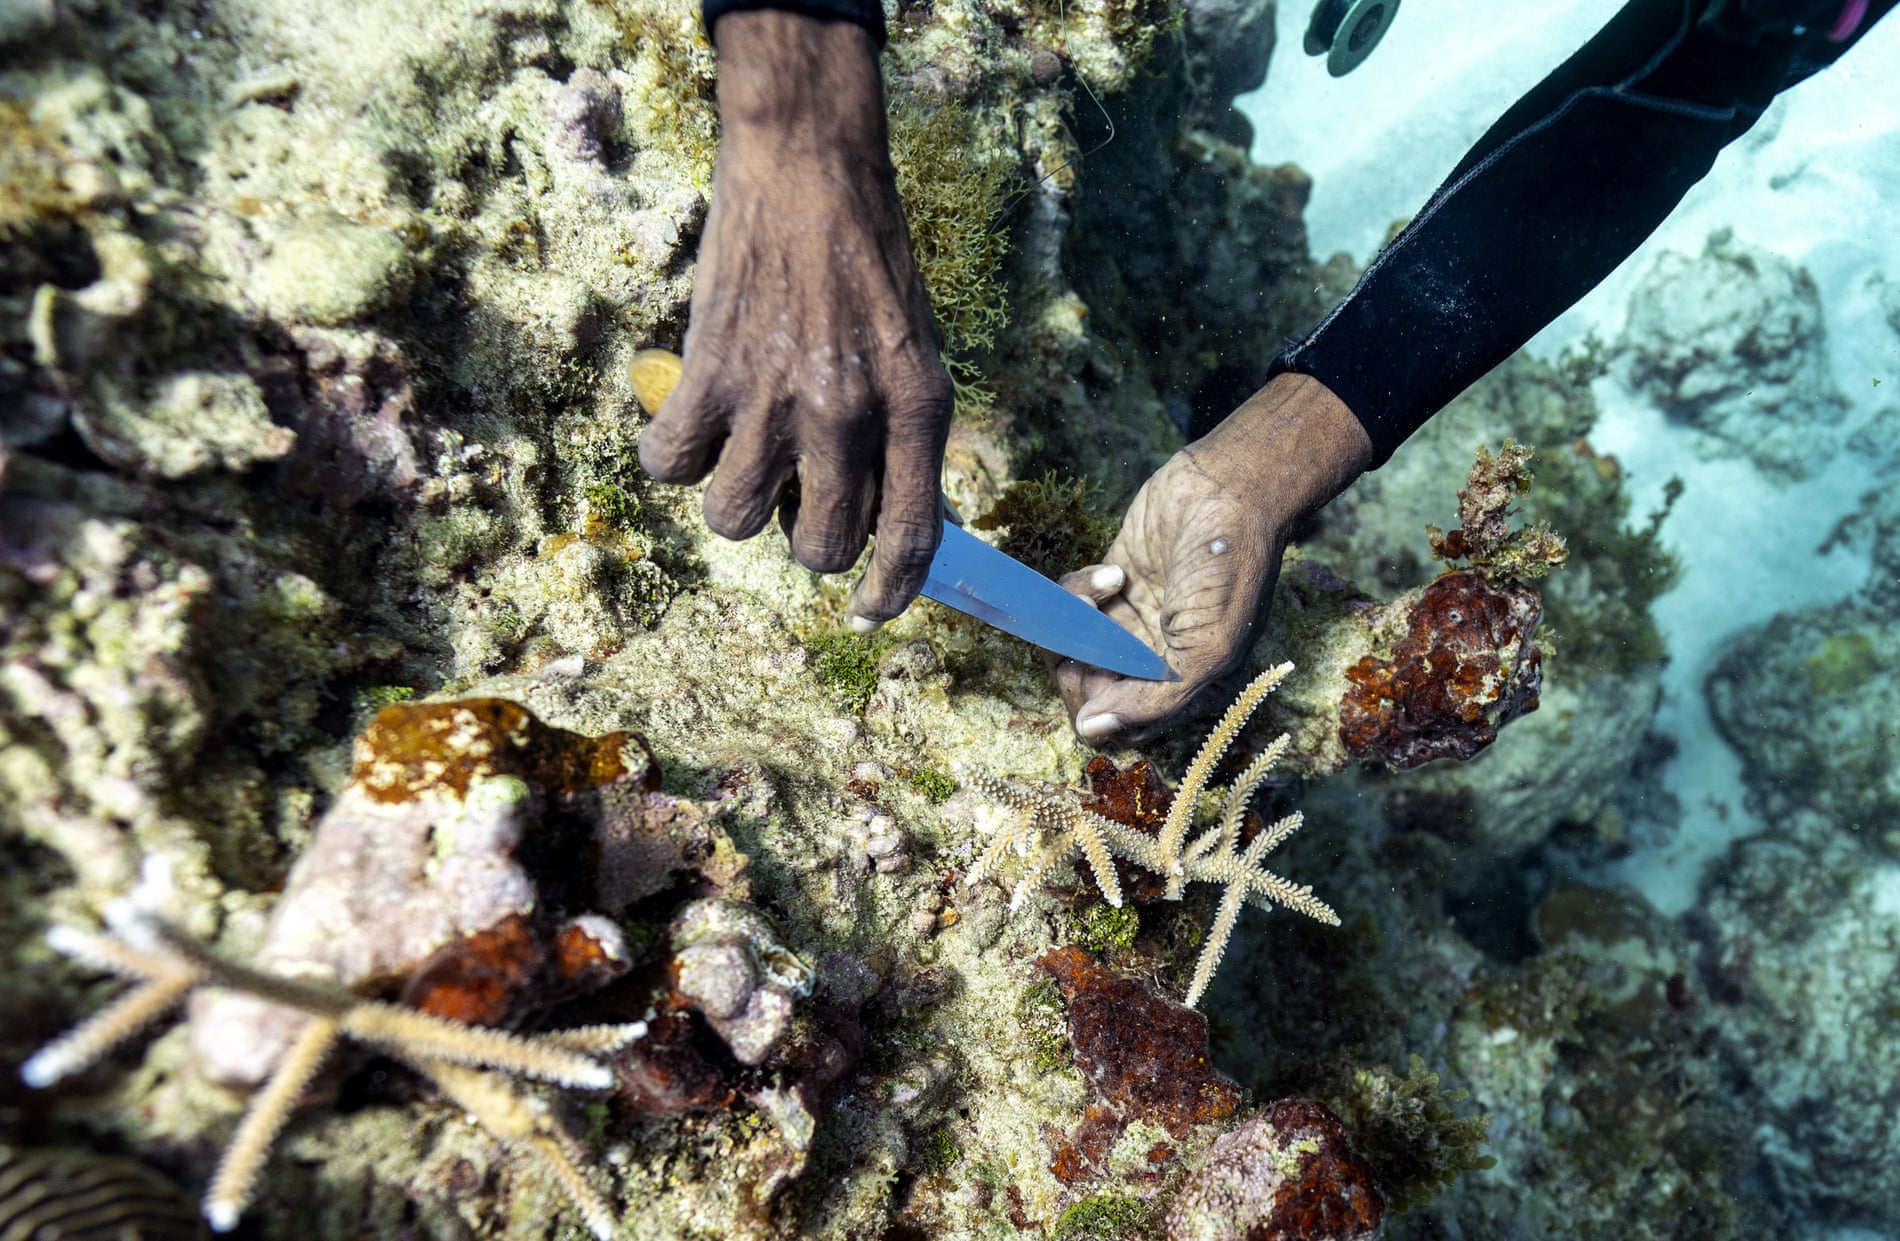 Diver Everton Simpson plants staghorn harvested from a coral nursery